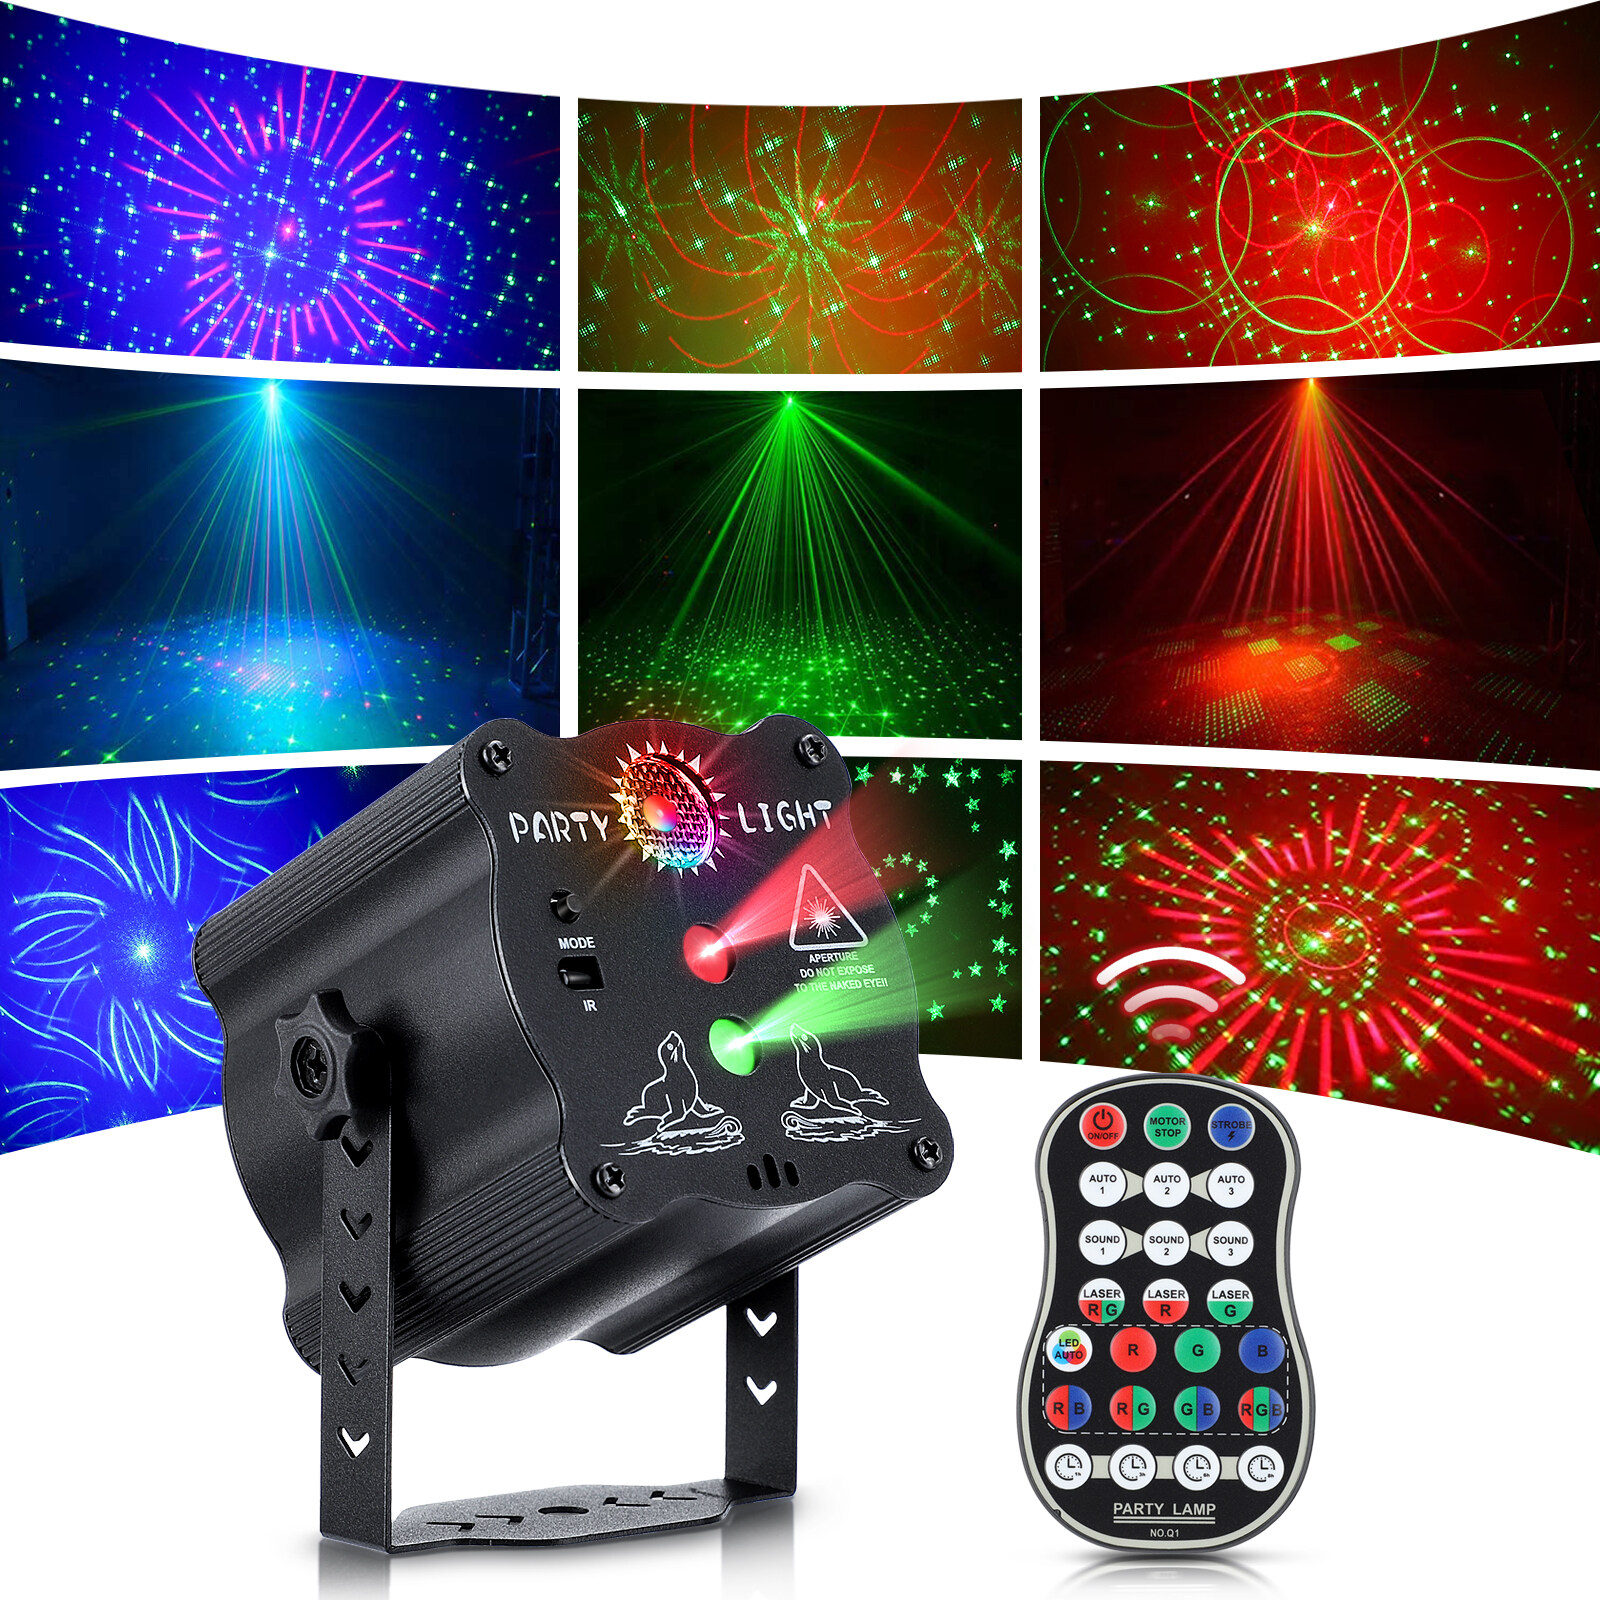 DJ Disco Light Stage Party Lights Sound Activated RGB Led Flash Strobe Projector with Remote Control for Christmas Karaoke Pub KTV Bar Birthday Wedding USB Powered 